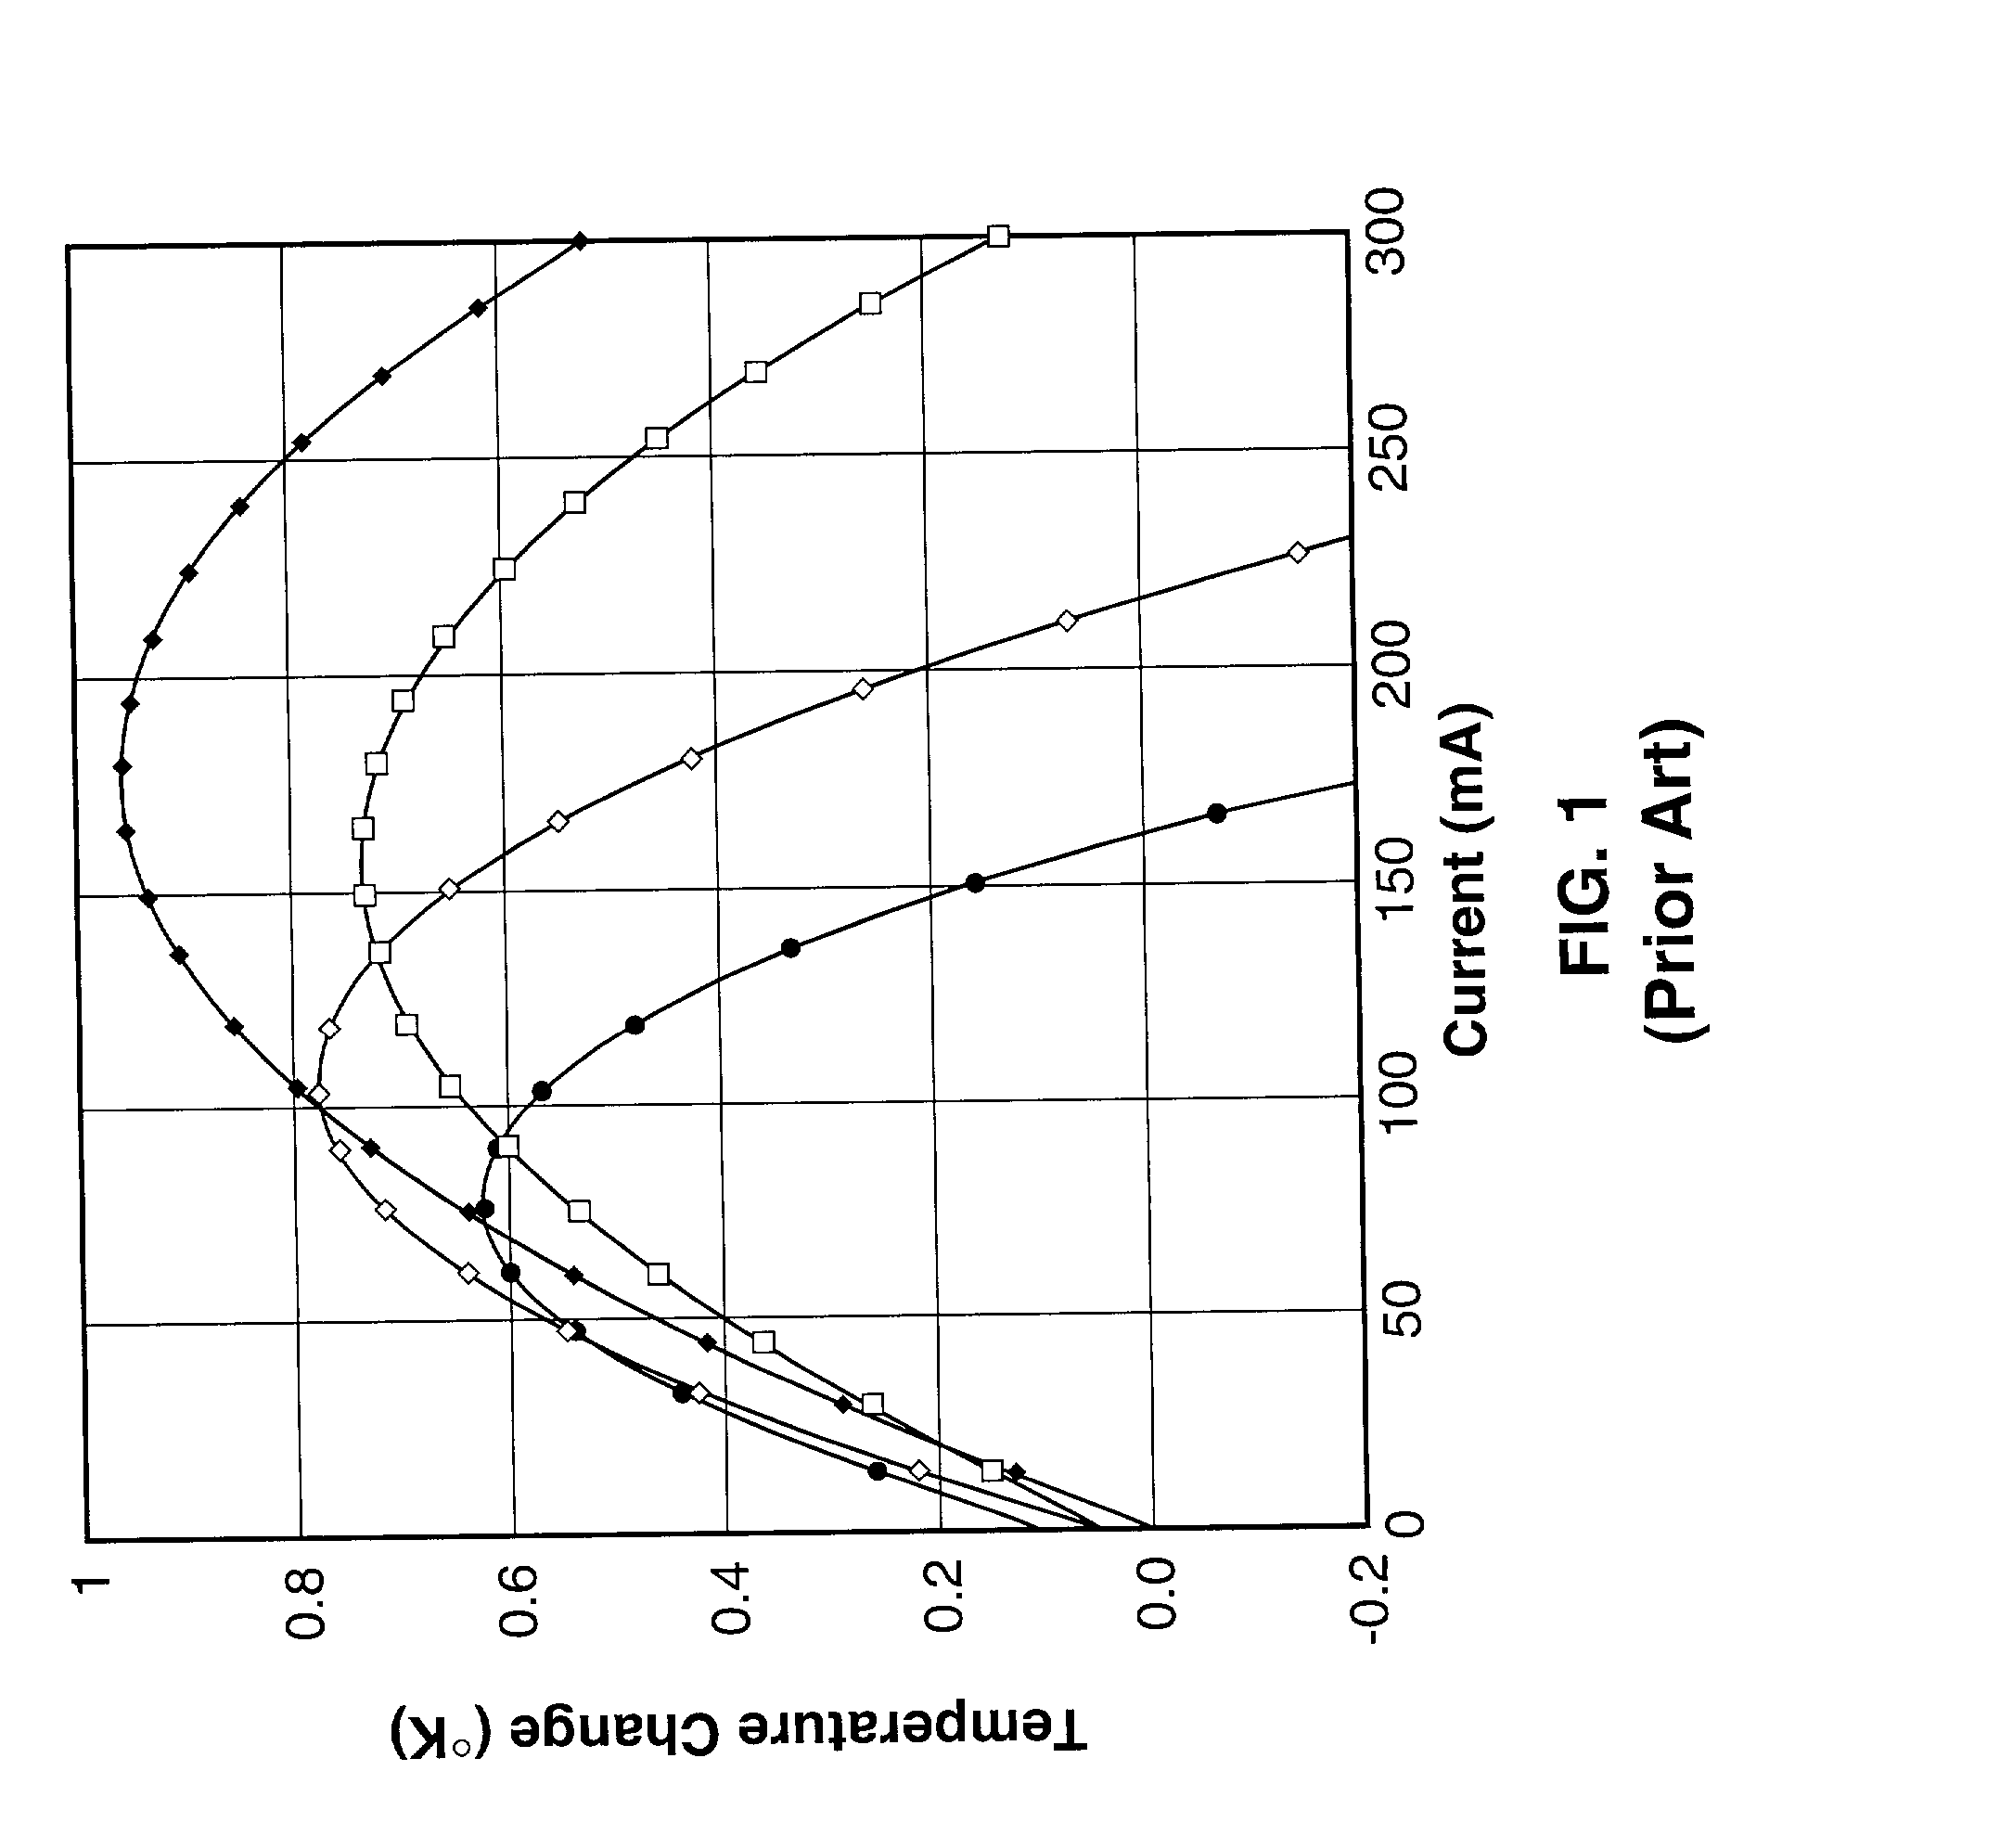 Submicron thermal imaging method and enhanced resolution (super-resolved) ac-coupled imaging for thermal inspection of integrated circuits